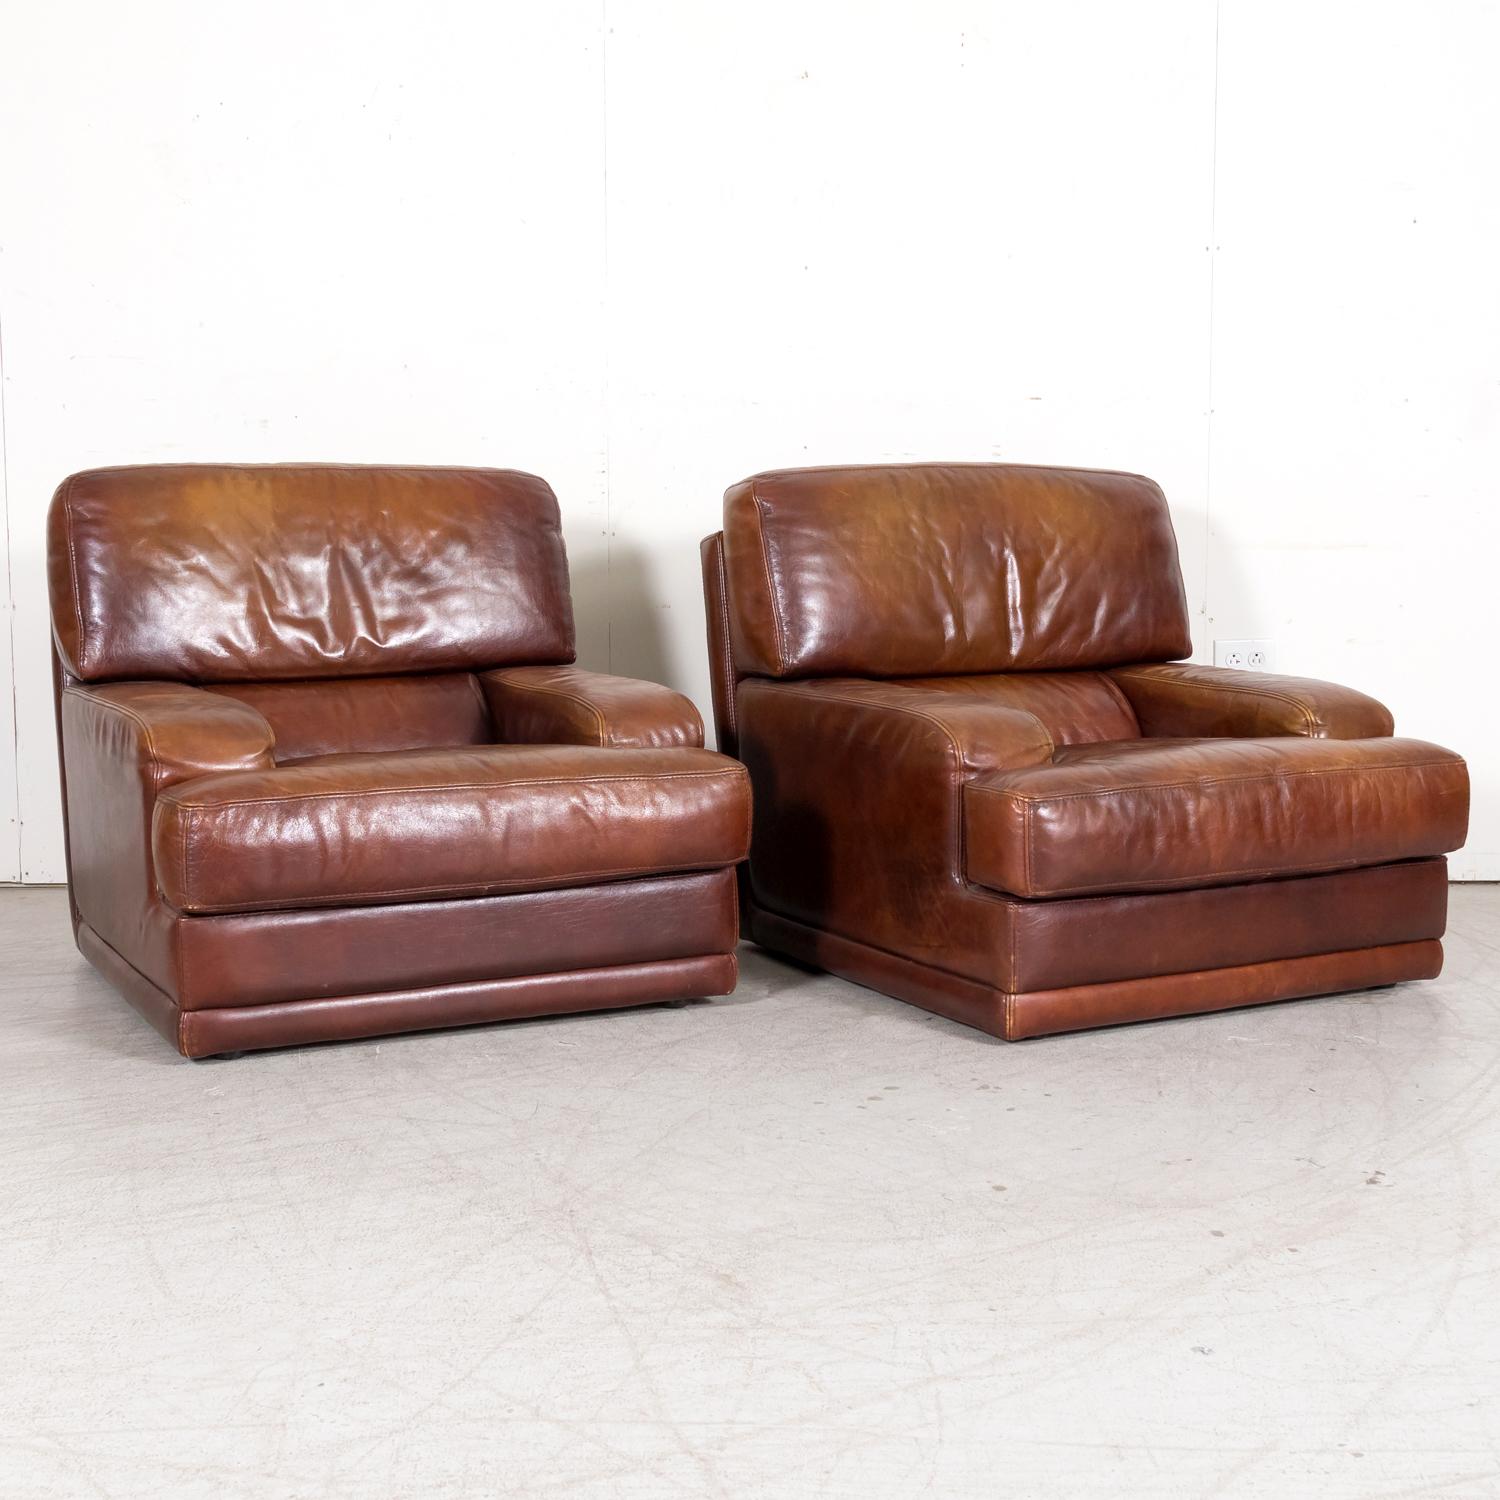 1970s Pair of French Mid-Century Modern Oversized Cognac Lounge Armchairs In Good Condition For Sale In Birmingham, AL